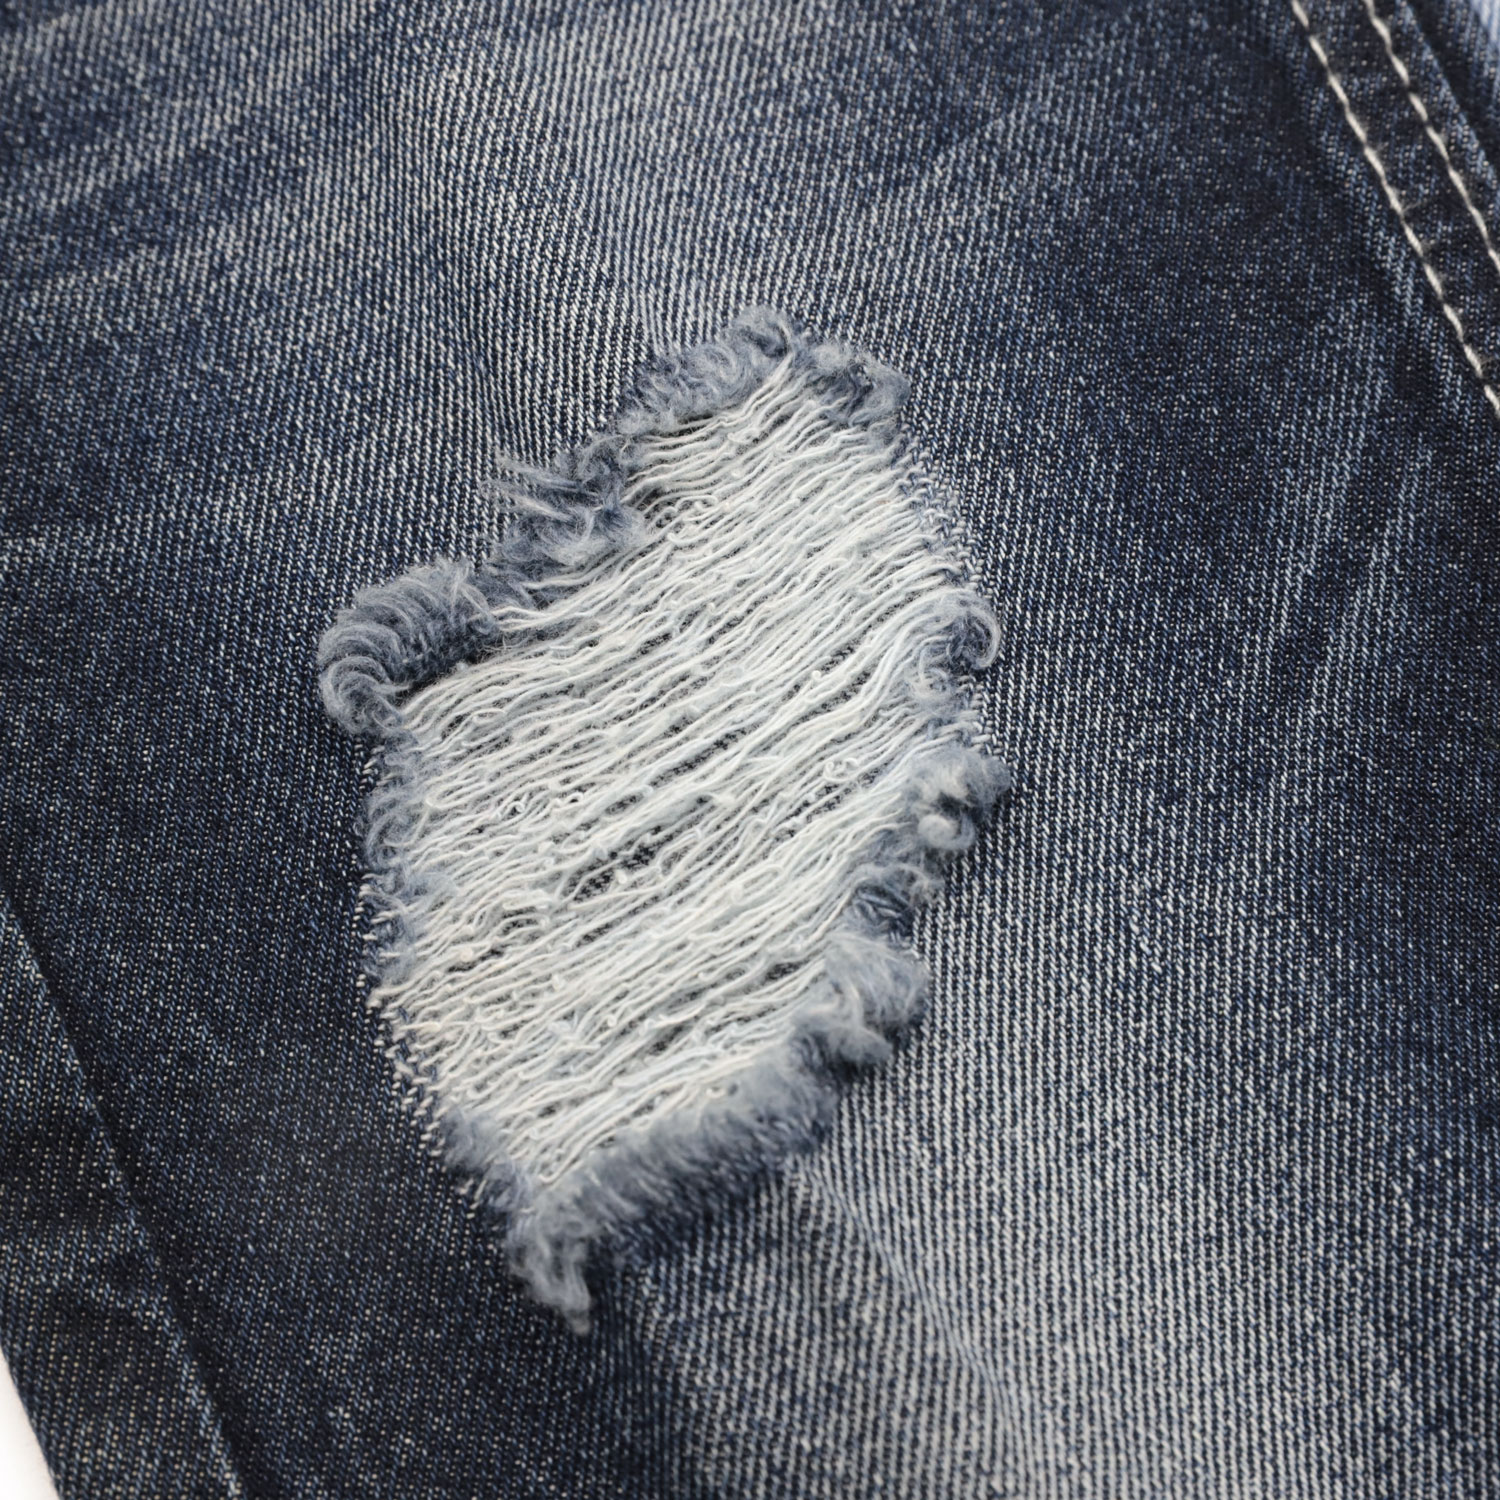 On Elastic Jeans and How to Avoid Losing Elasticity 1